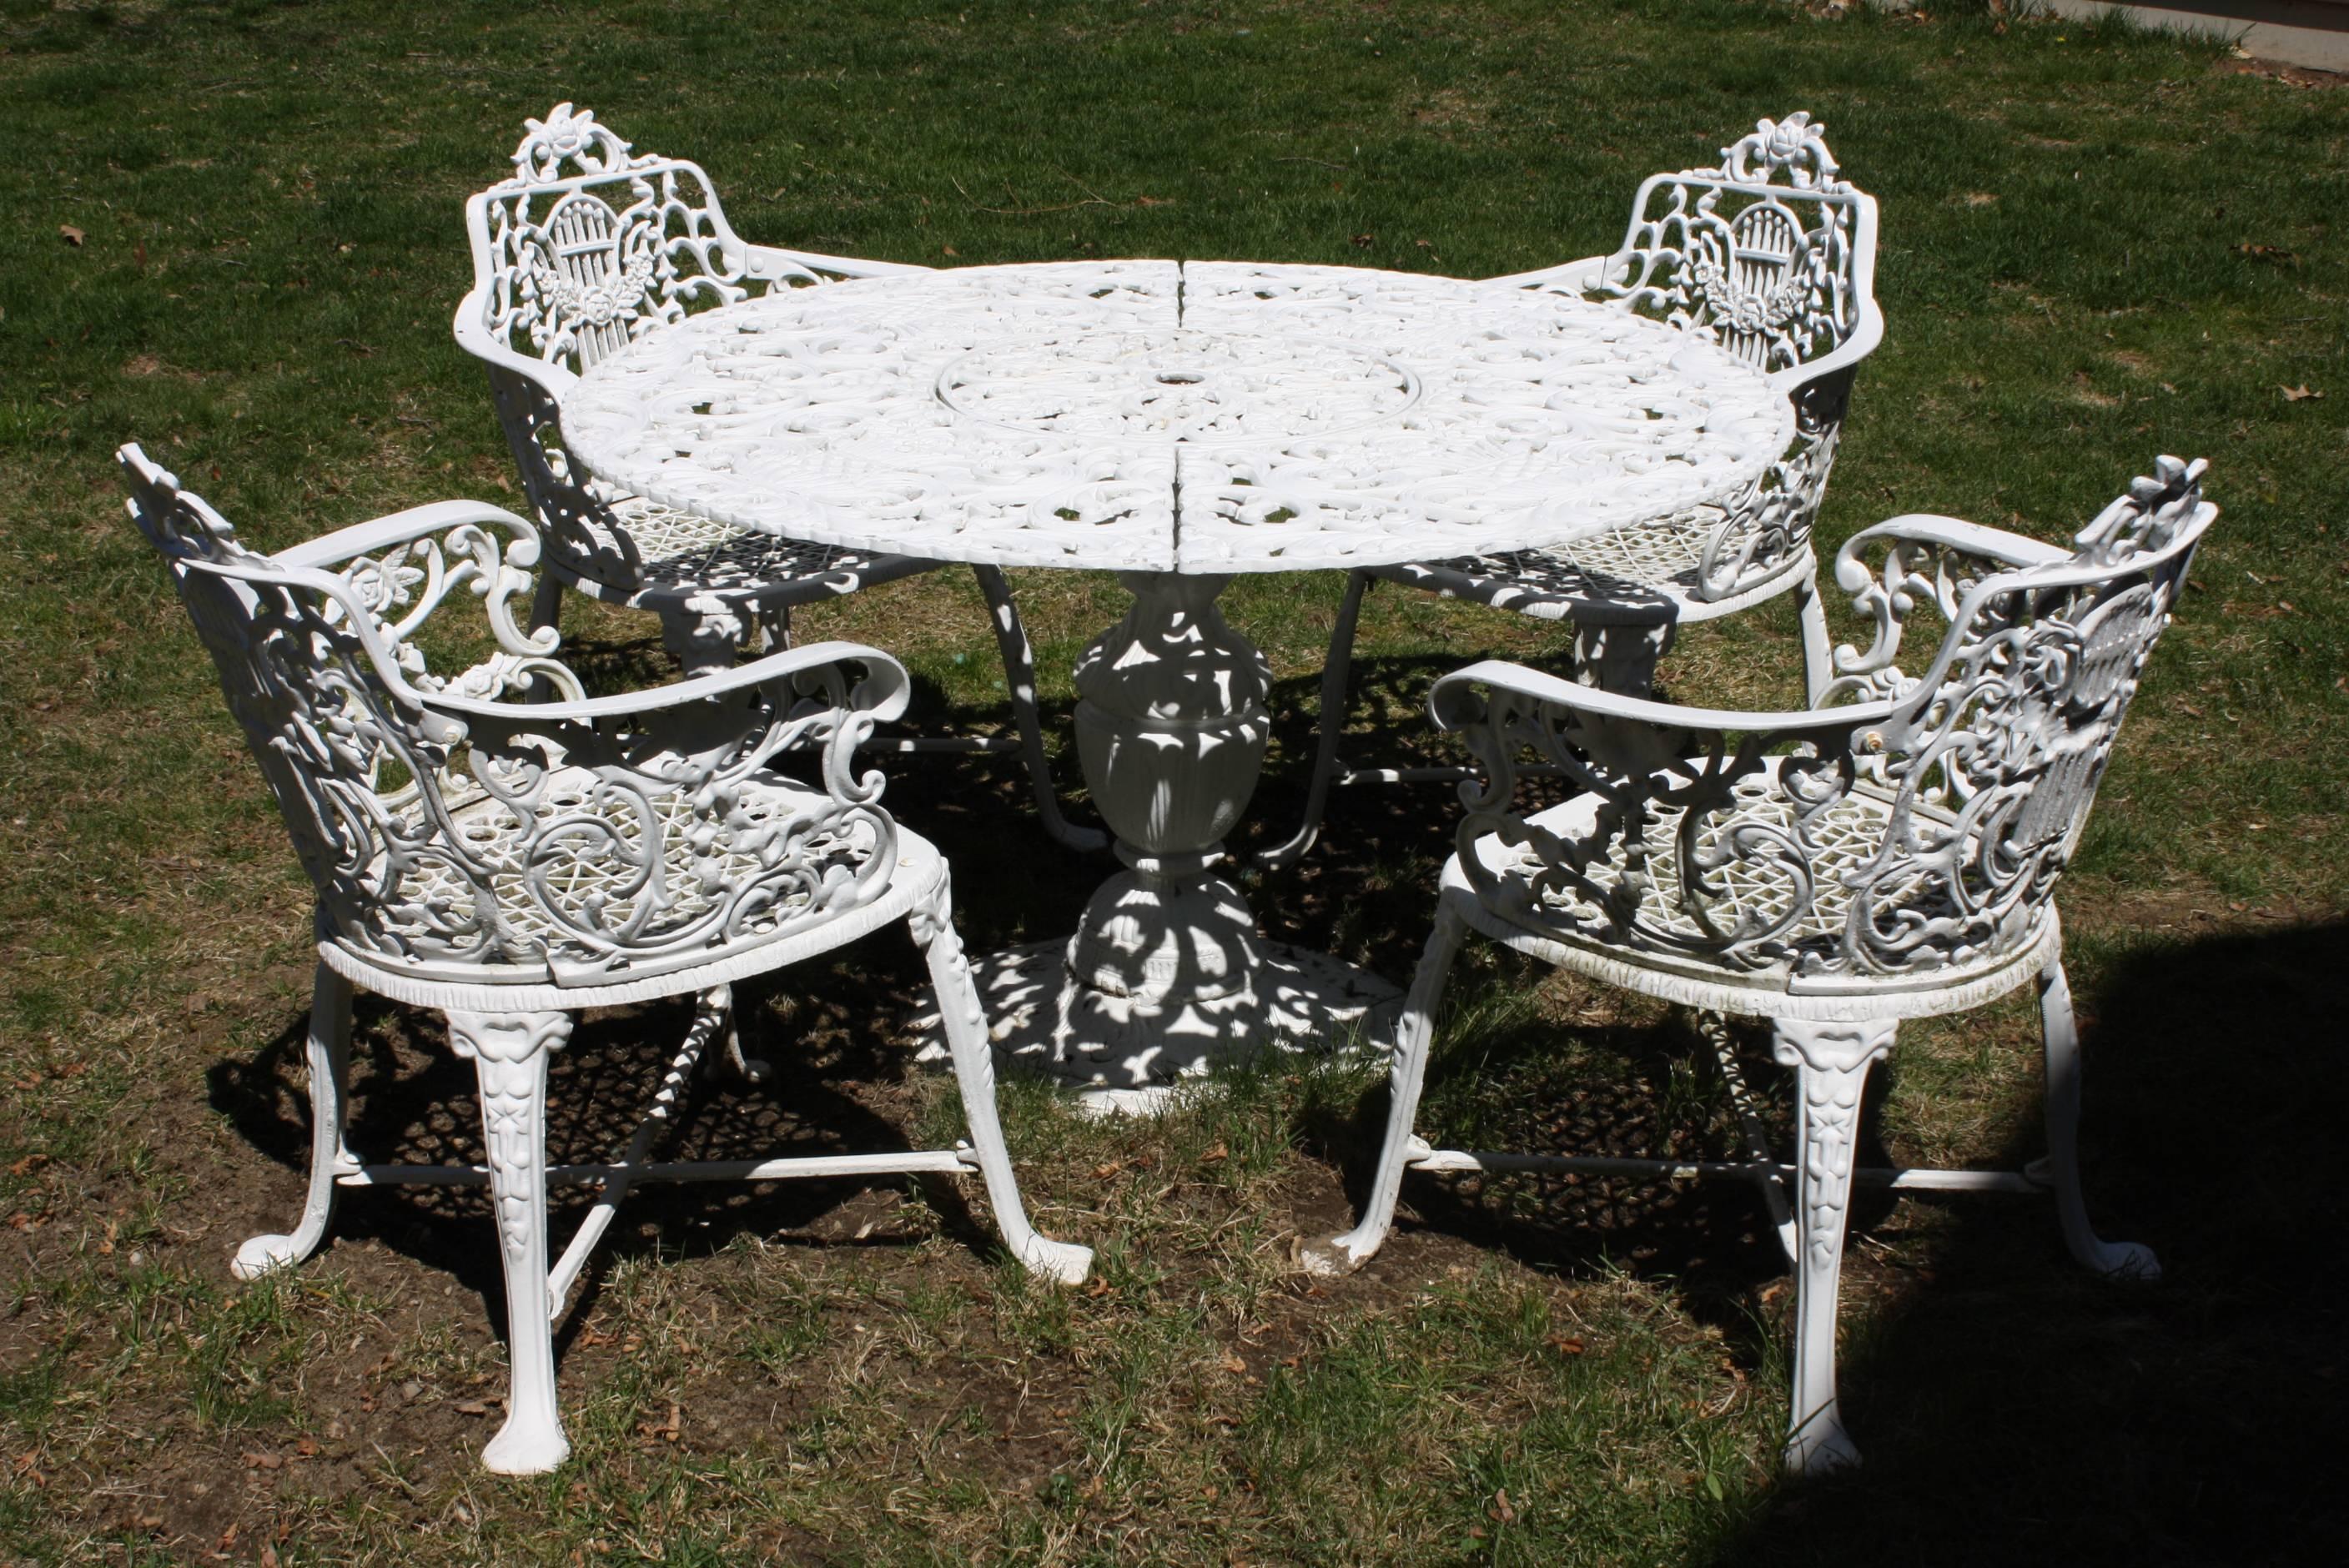 Wonderful ornate Victorian style garden dining set comprising a table and four armchairs. The set is made of cast aluminum so it is light and easy to move, and will not rust (this set has none of the care and maintenance associated with cast iron).